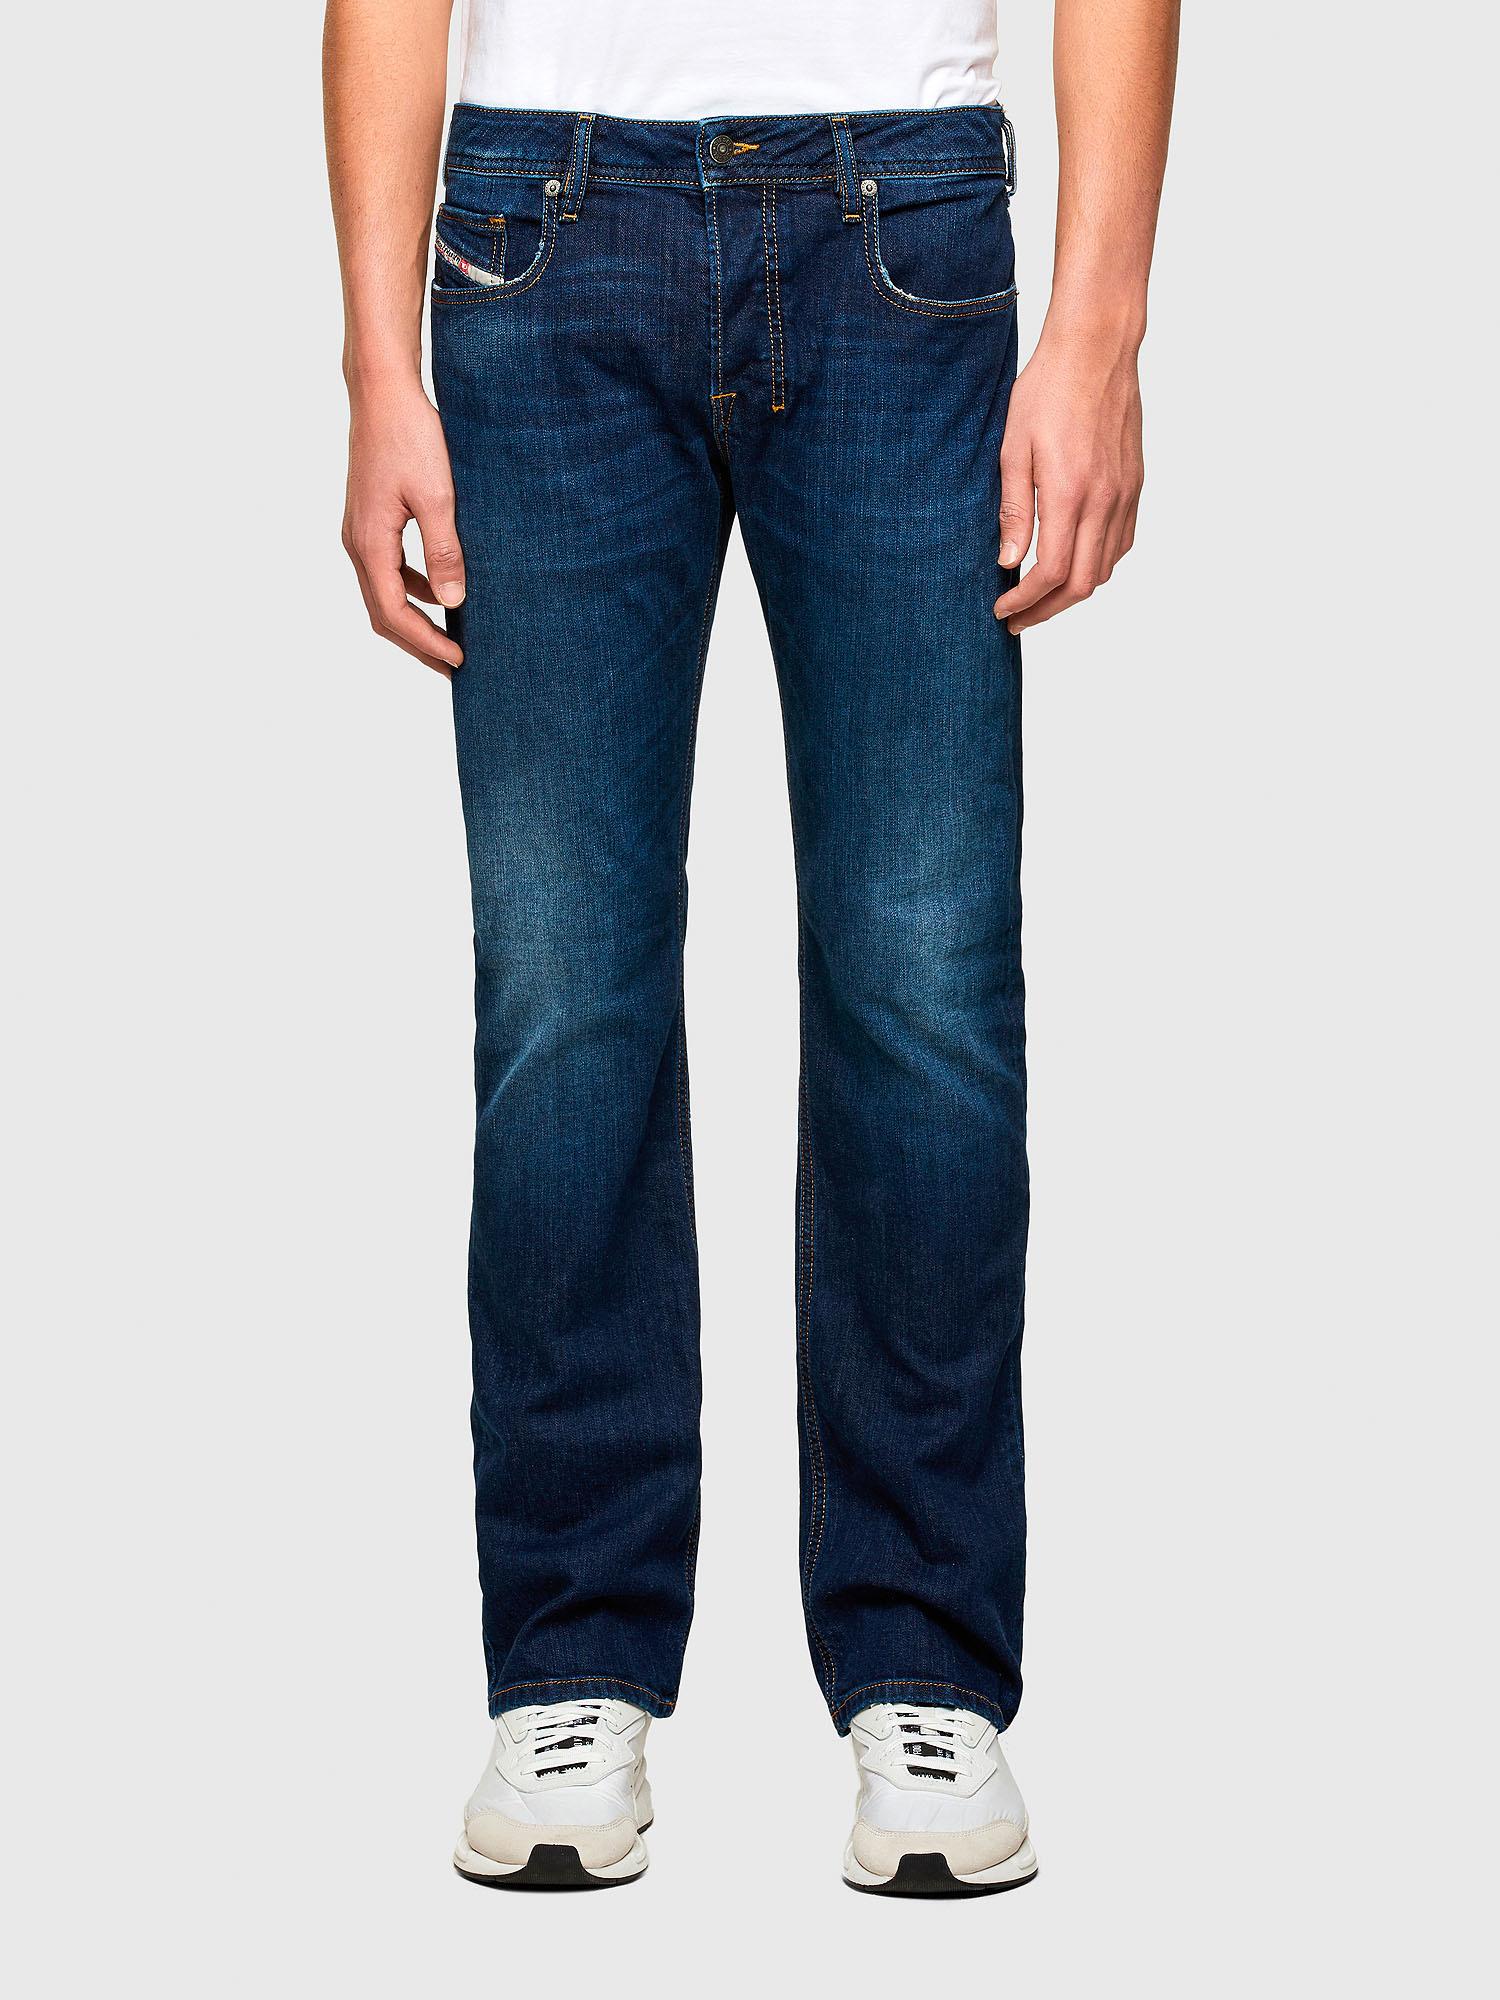 Diesel - Zatiny 082AY Bootcut Jeans,  - Image 2